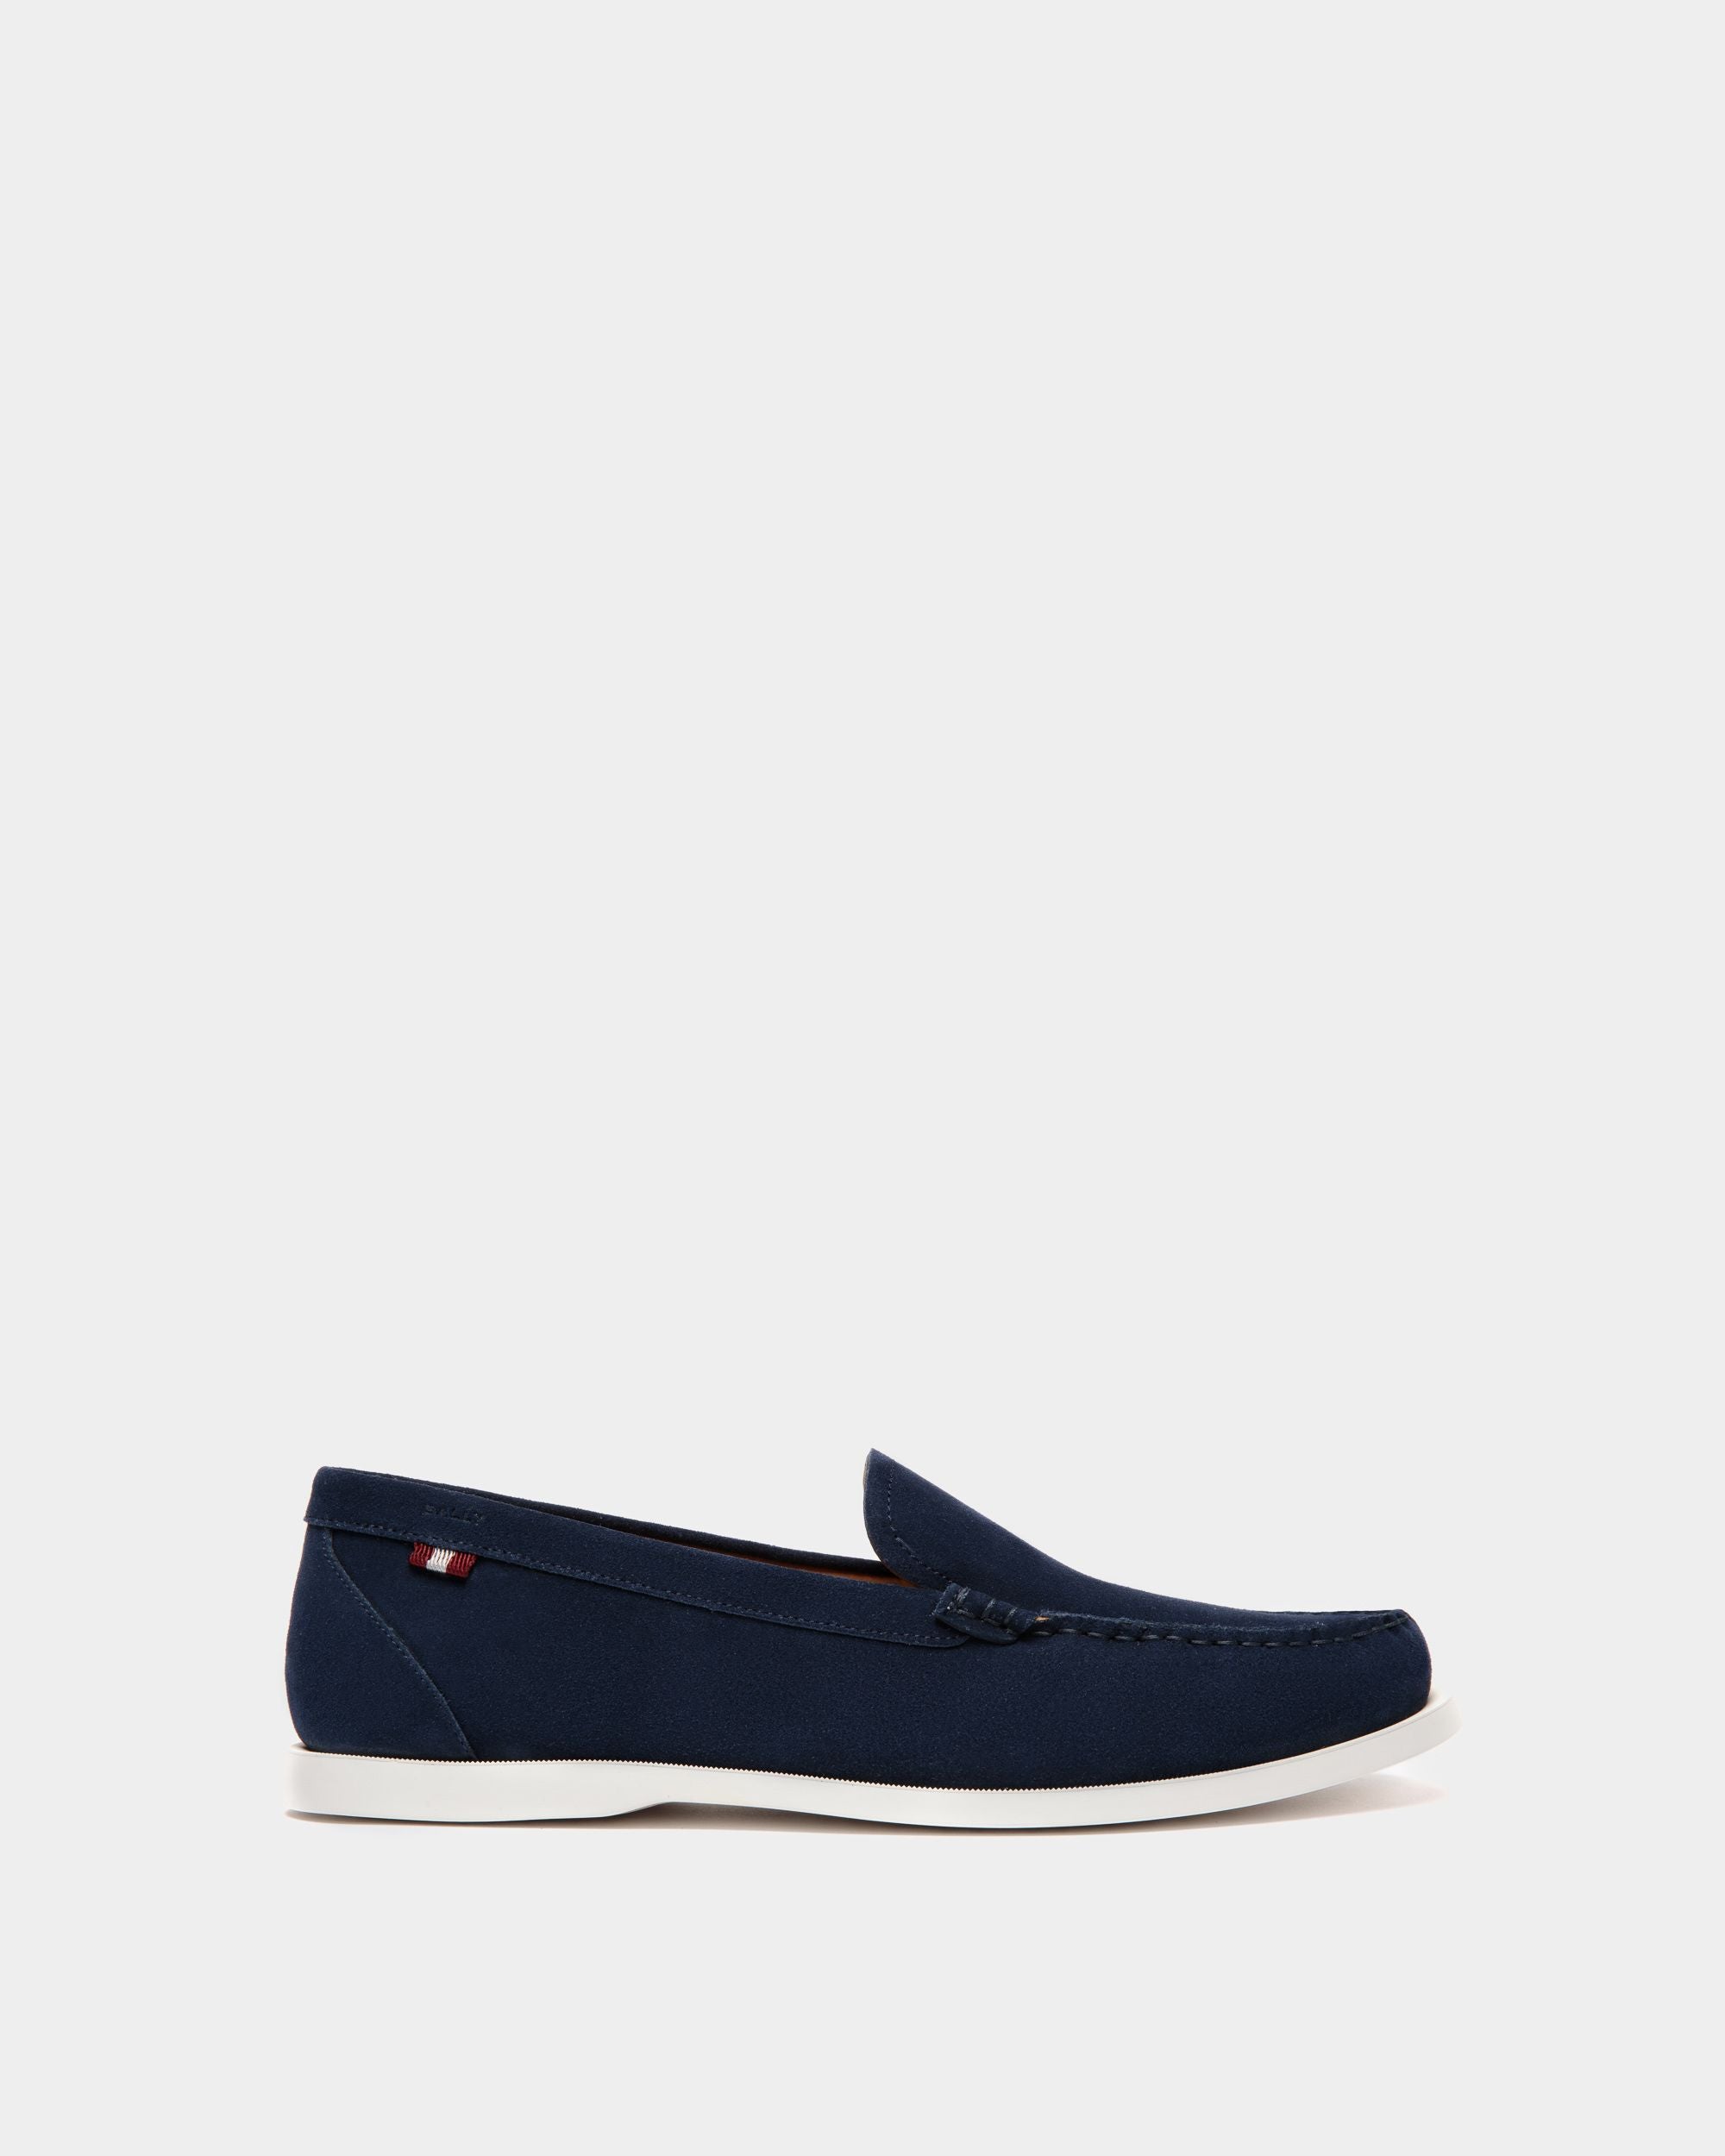 Nelson | Men's Loafer in Blue Suede  | Bally | Still Life Side